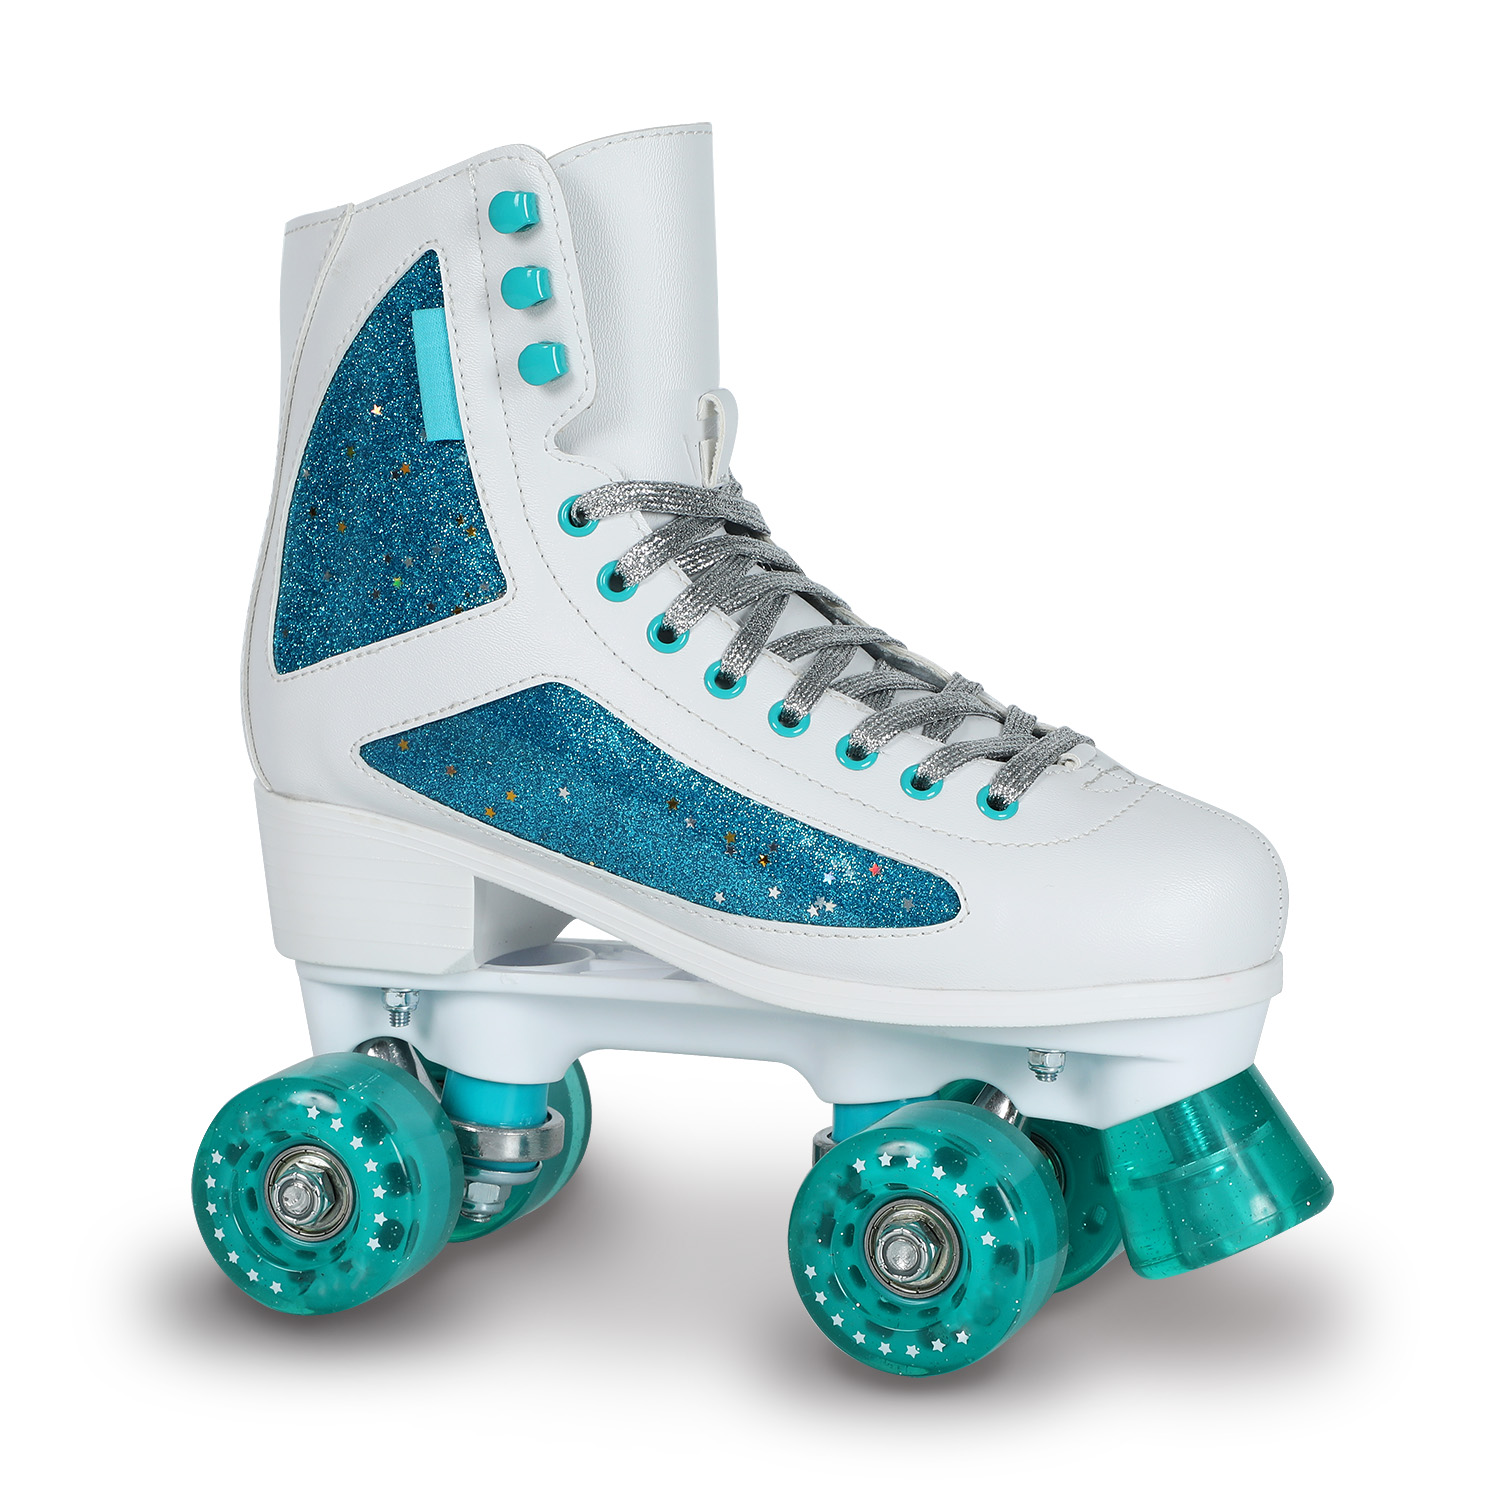 HARD BOOT ADULT QUAD ROLLER SKATE WITH GLITTER MATERIAL 